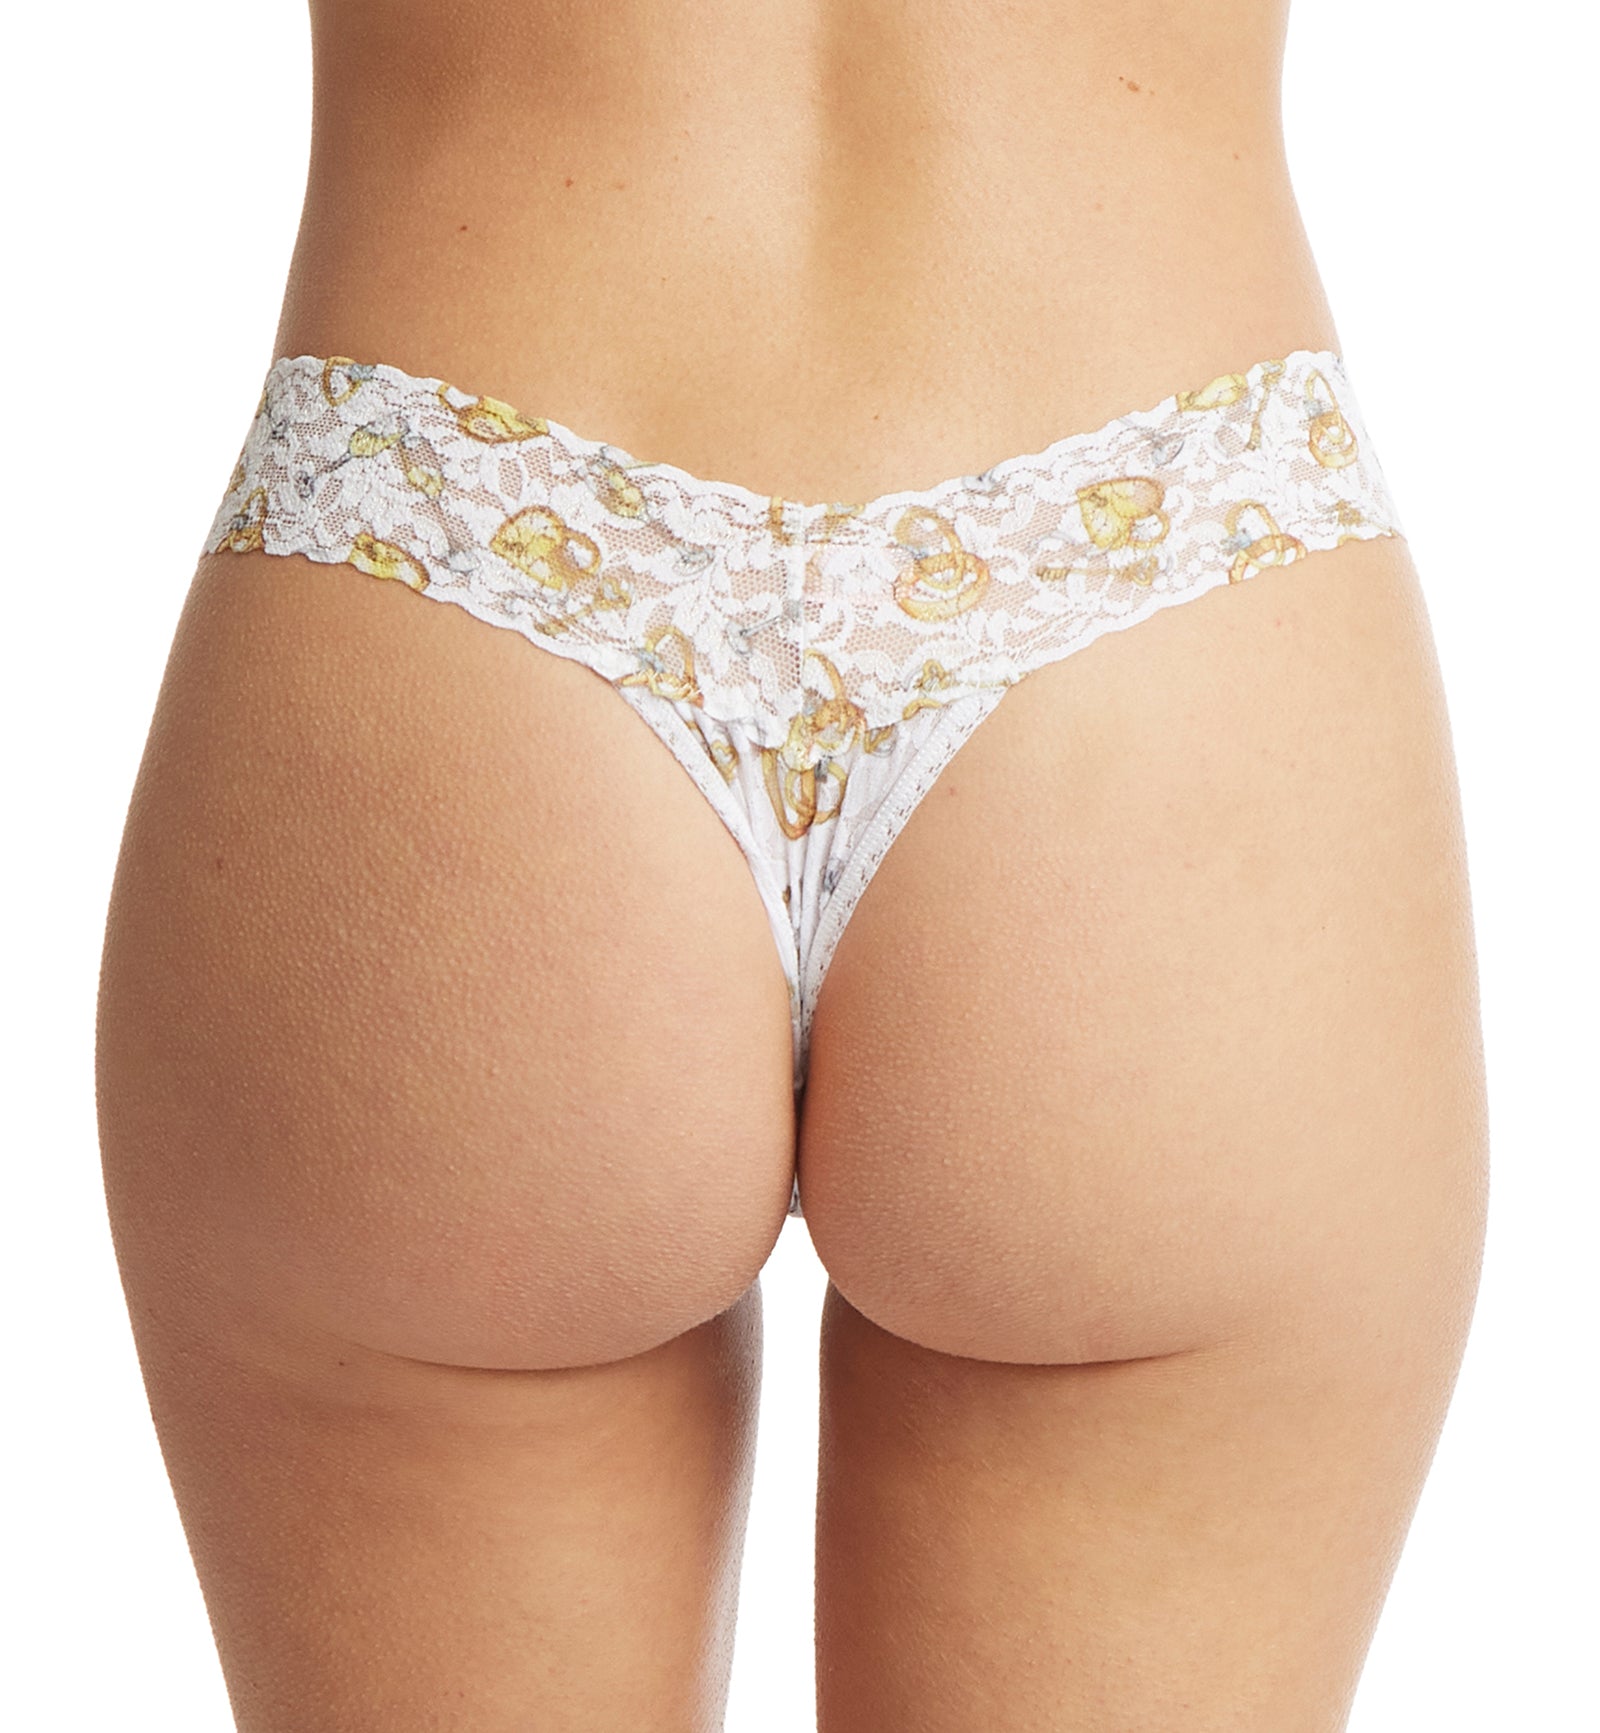 Hanky Panky Signature Lace Printed Low Rise Thong (PR4911P),Forever Gold - Forever Gold,One Size